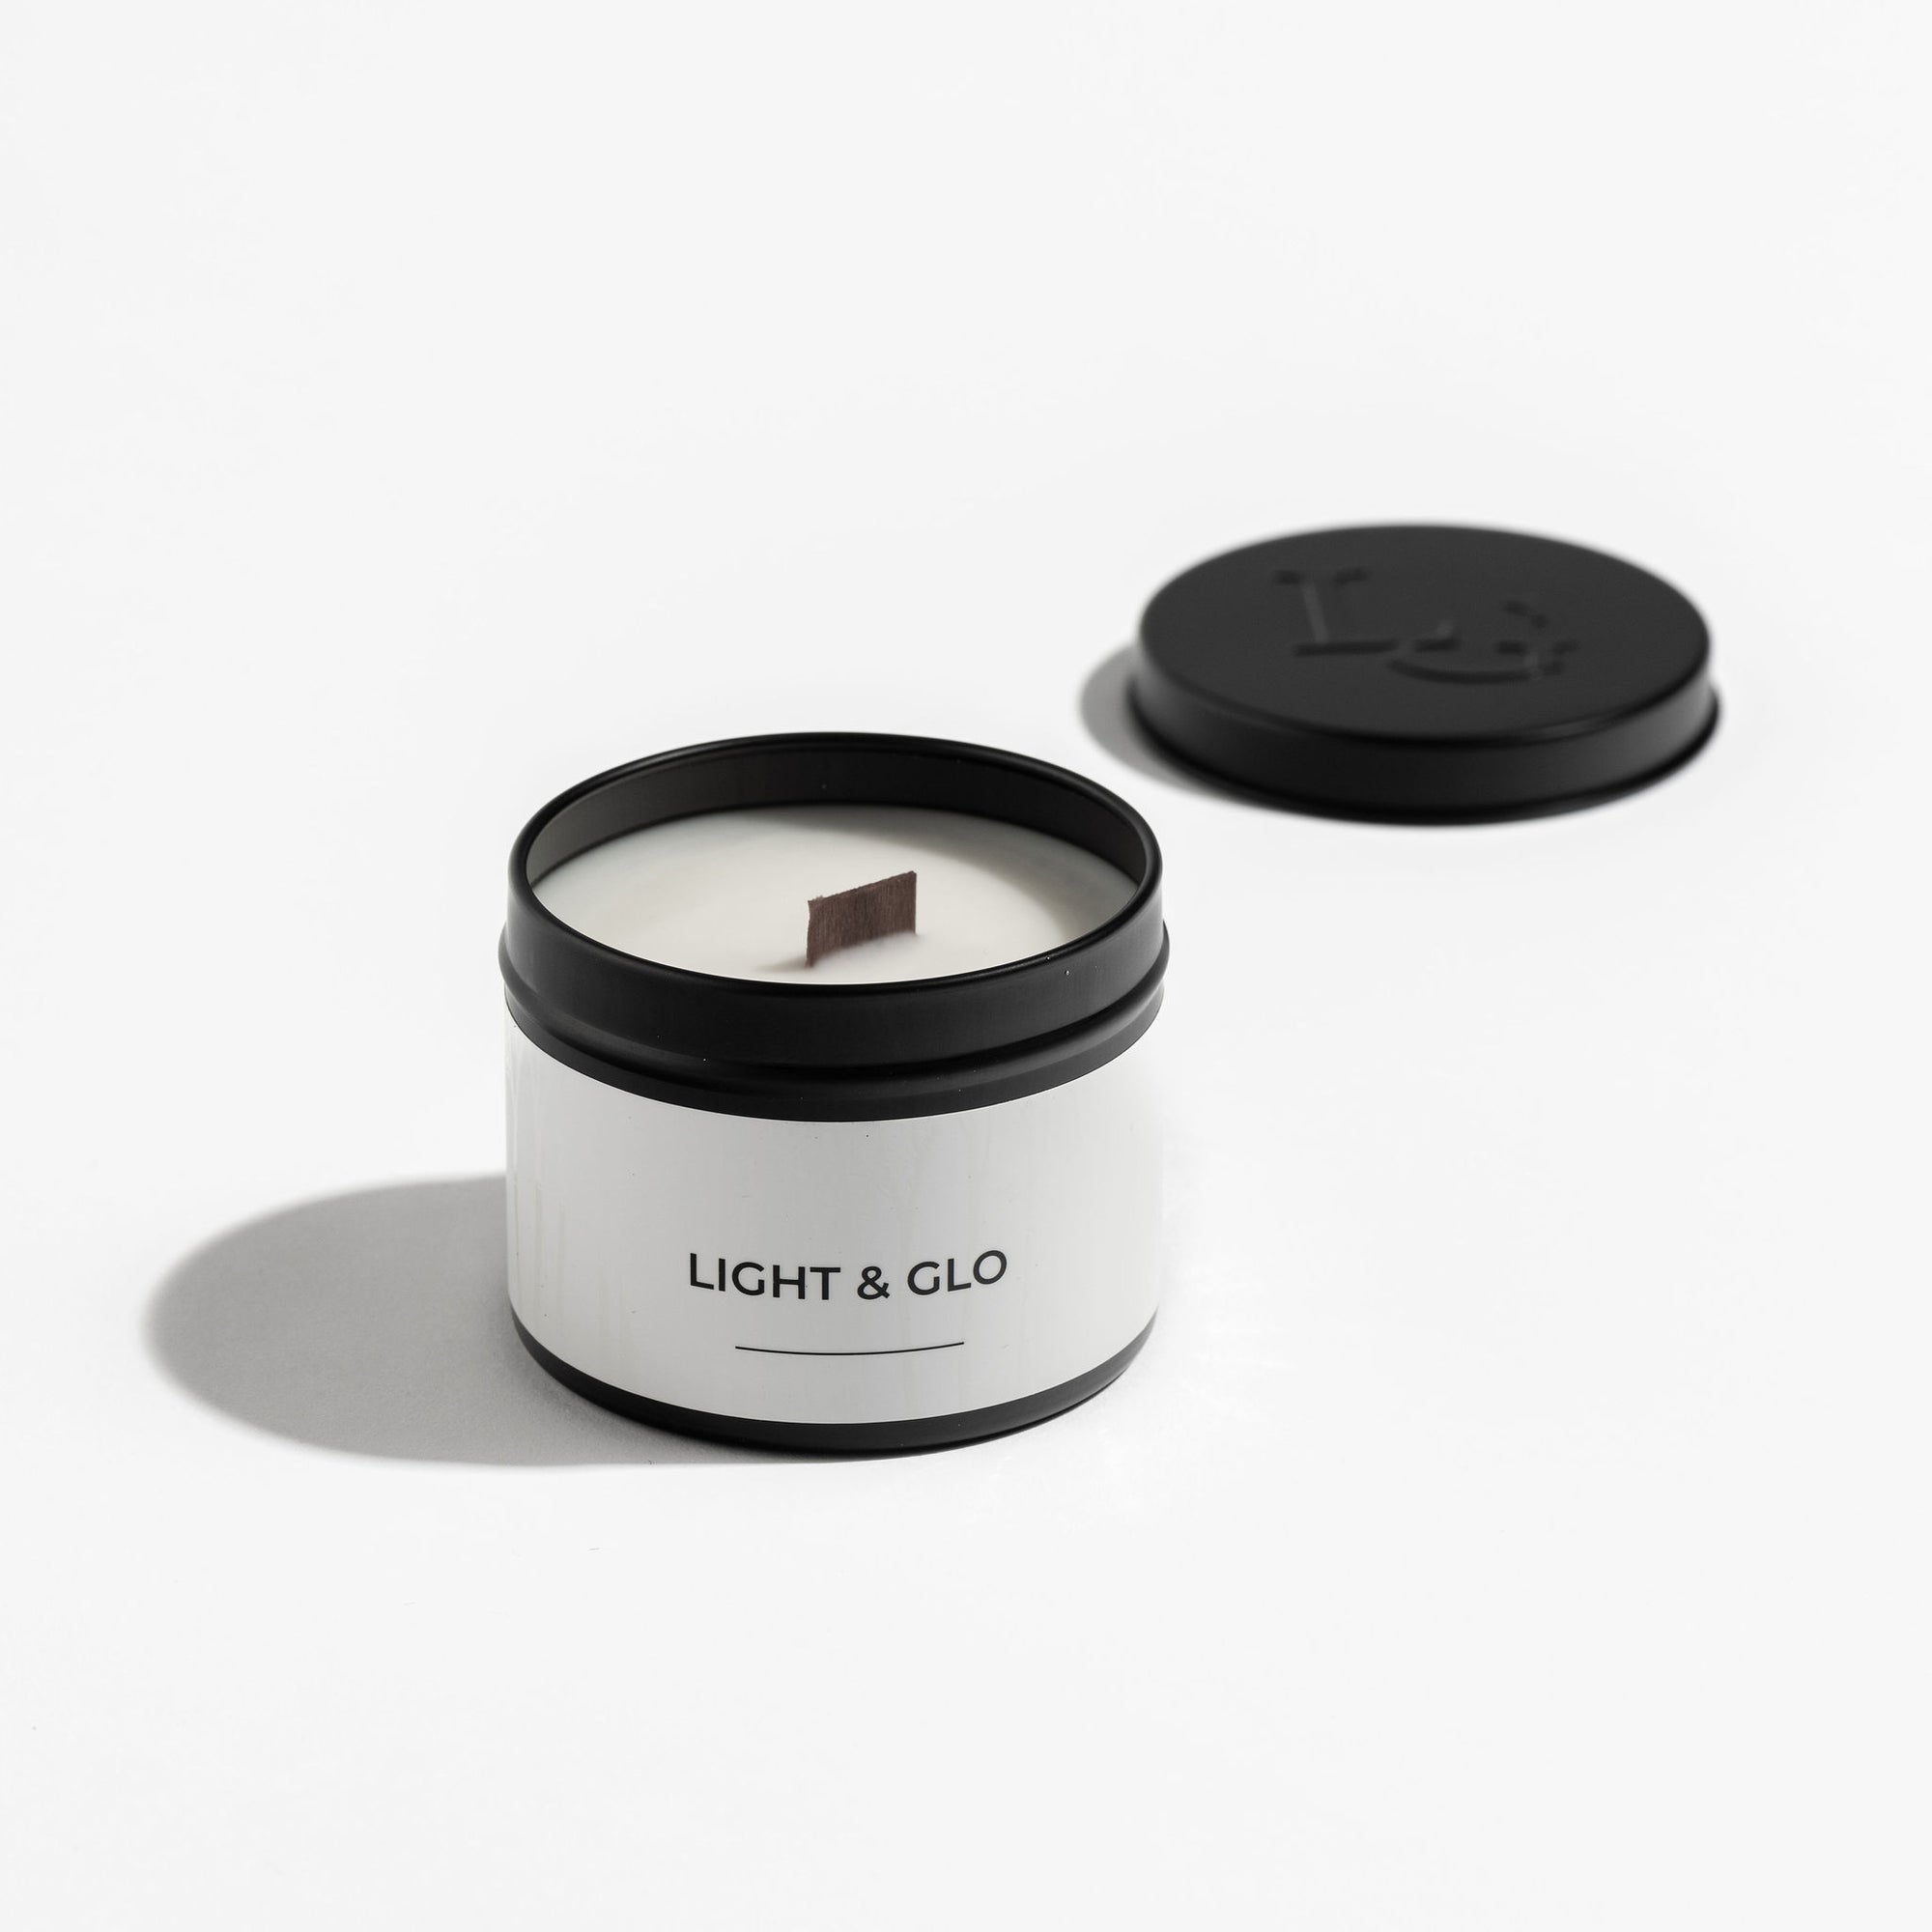 Tiger Lily & Patchouli - Monochrome Travel Candle | Luxury Candles & Home Fragrances by Light + Glo